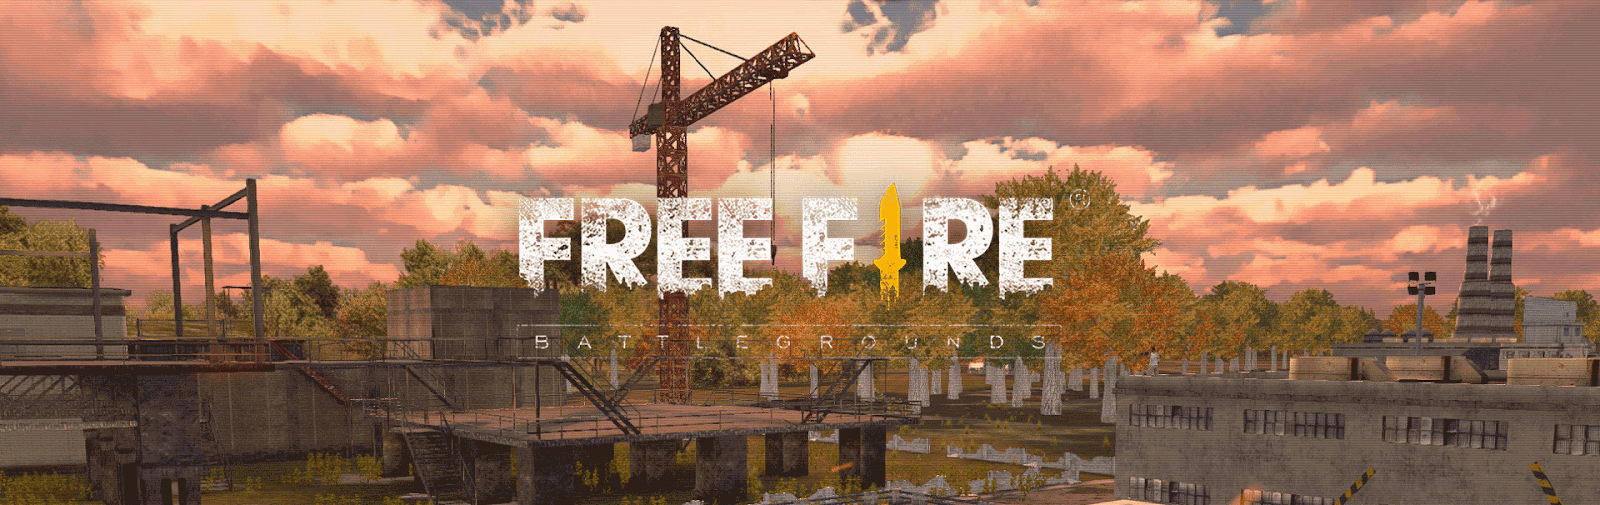 Free Fire Wallpaper For Android Hd Wallpaper Loader